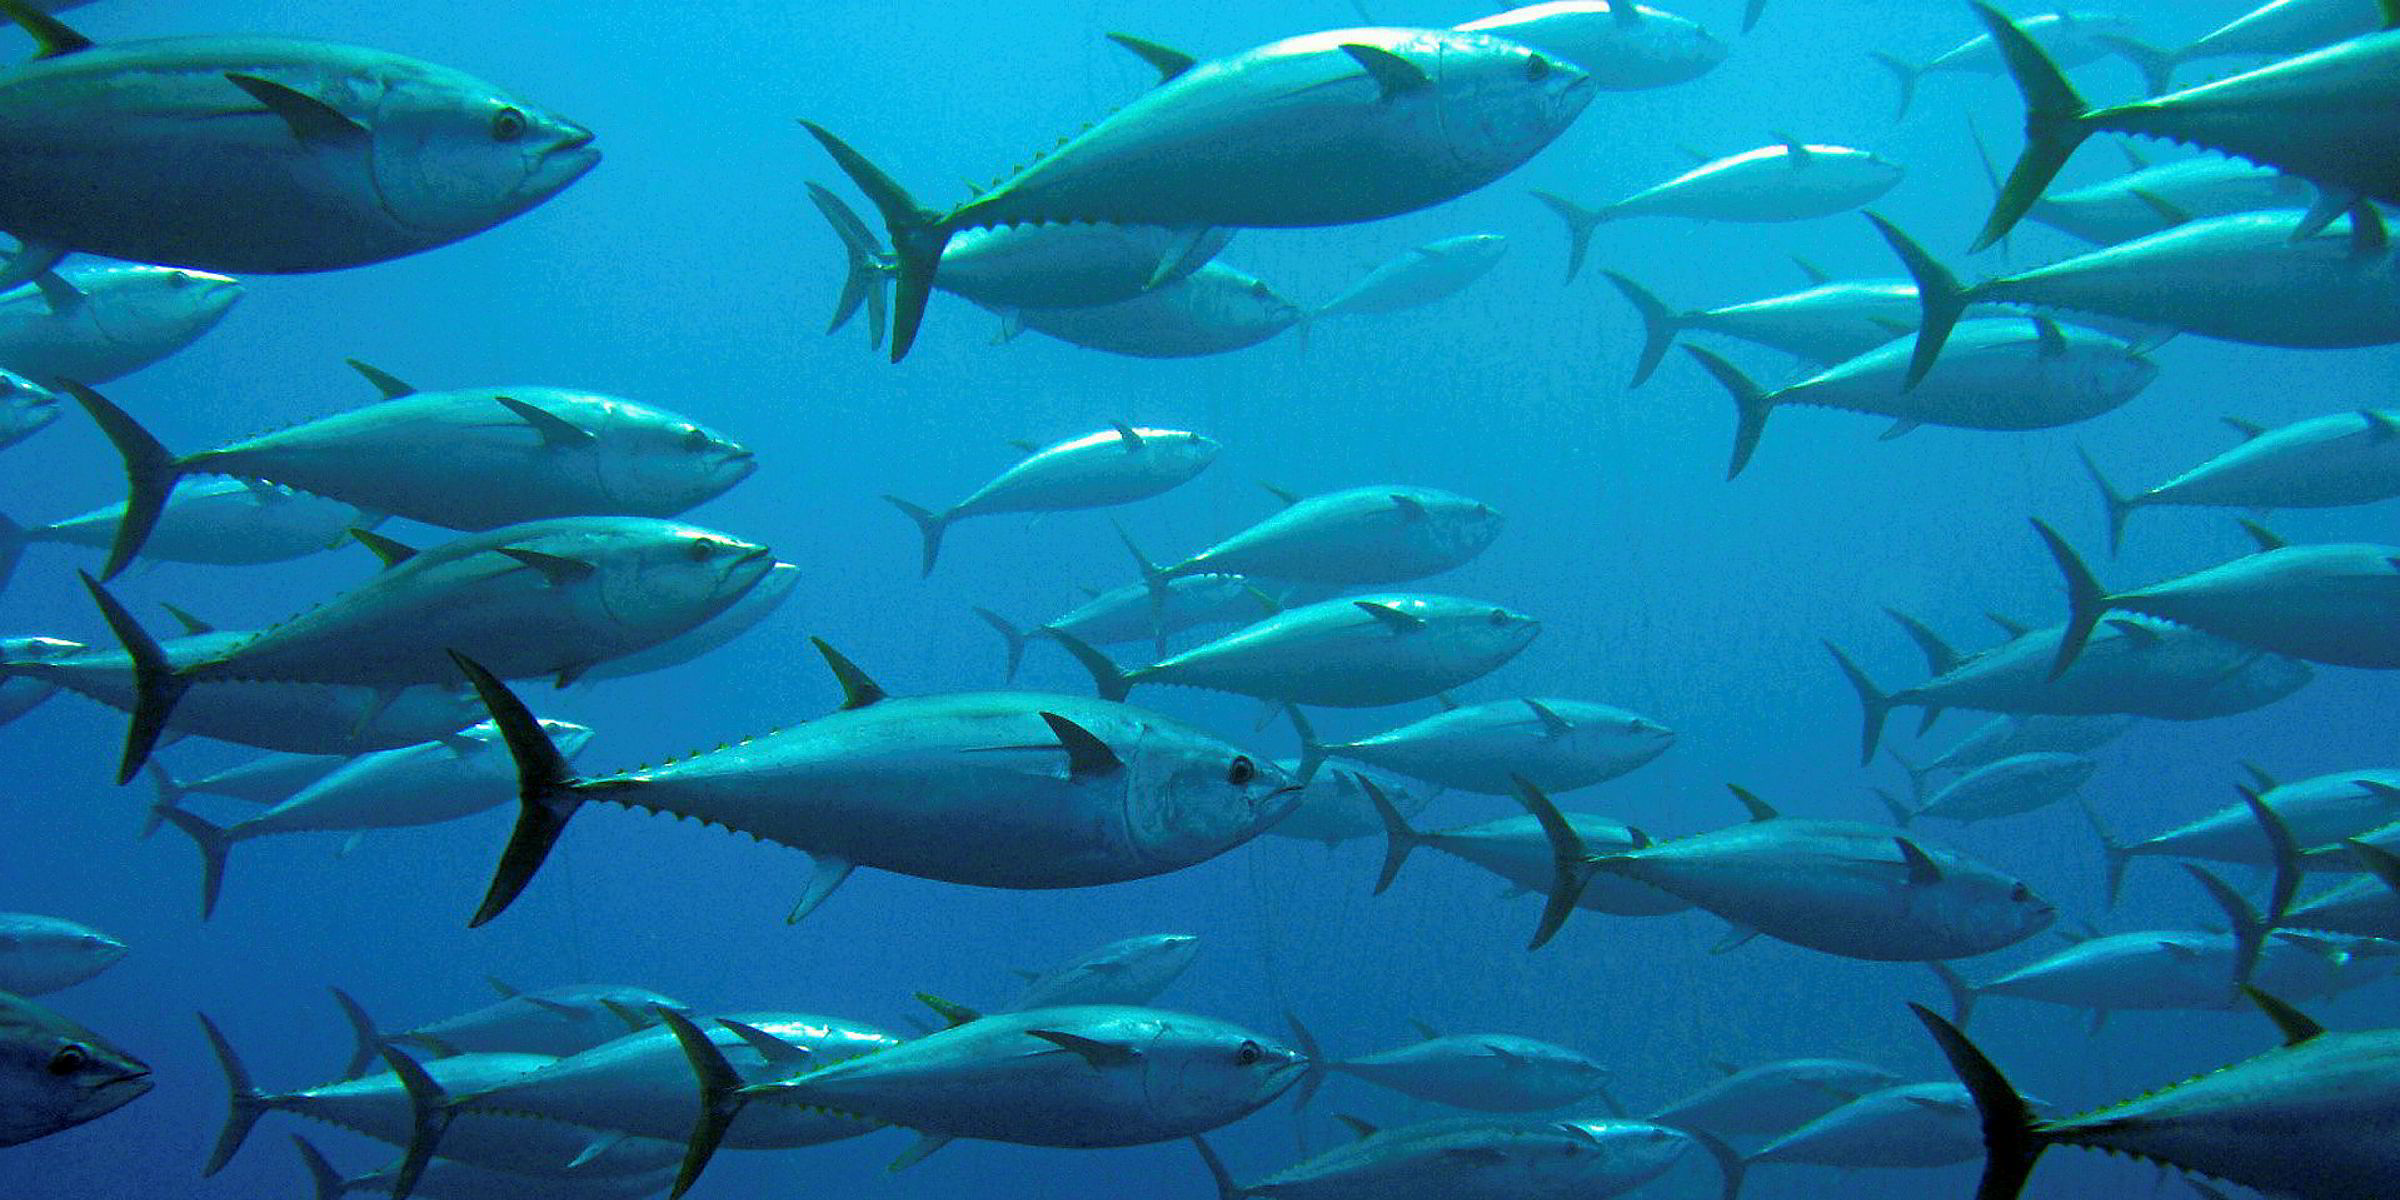 ISSF report shows more tuna stocks at 'healthy' levels